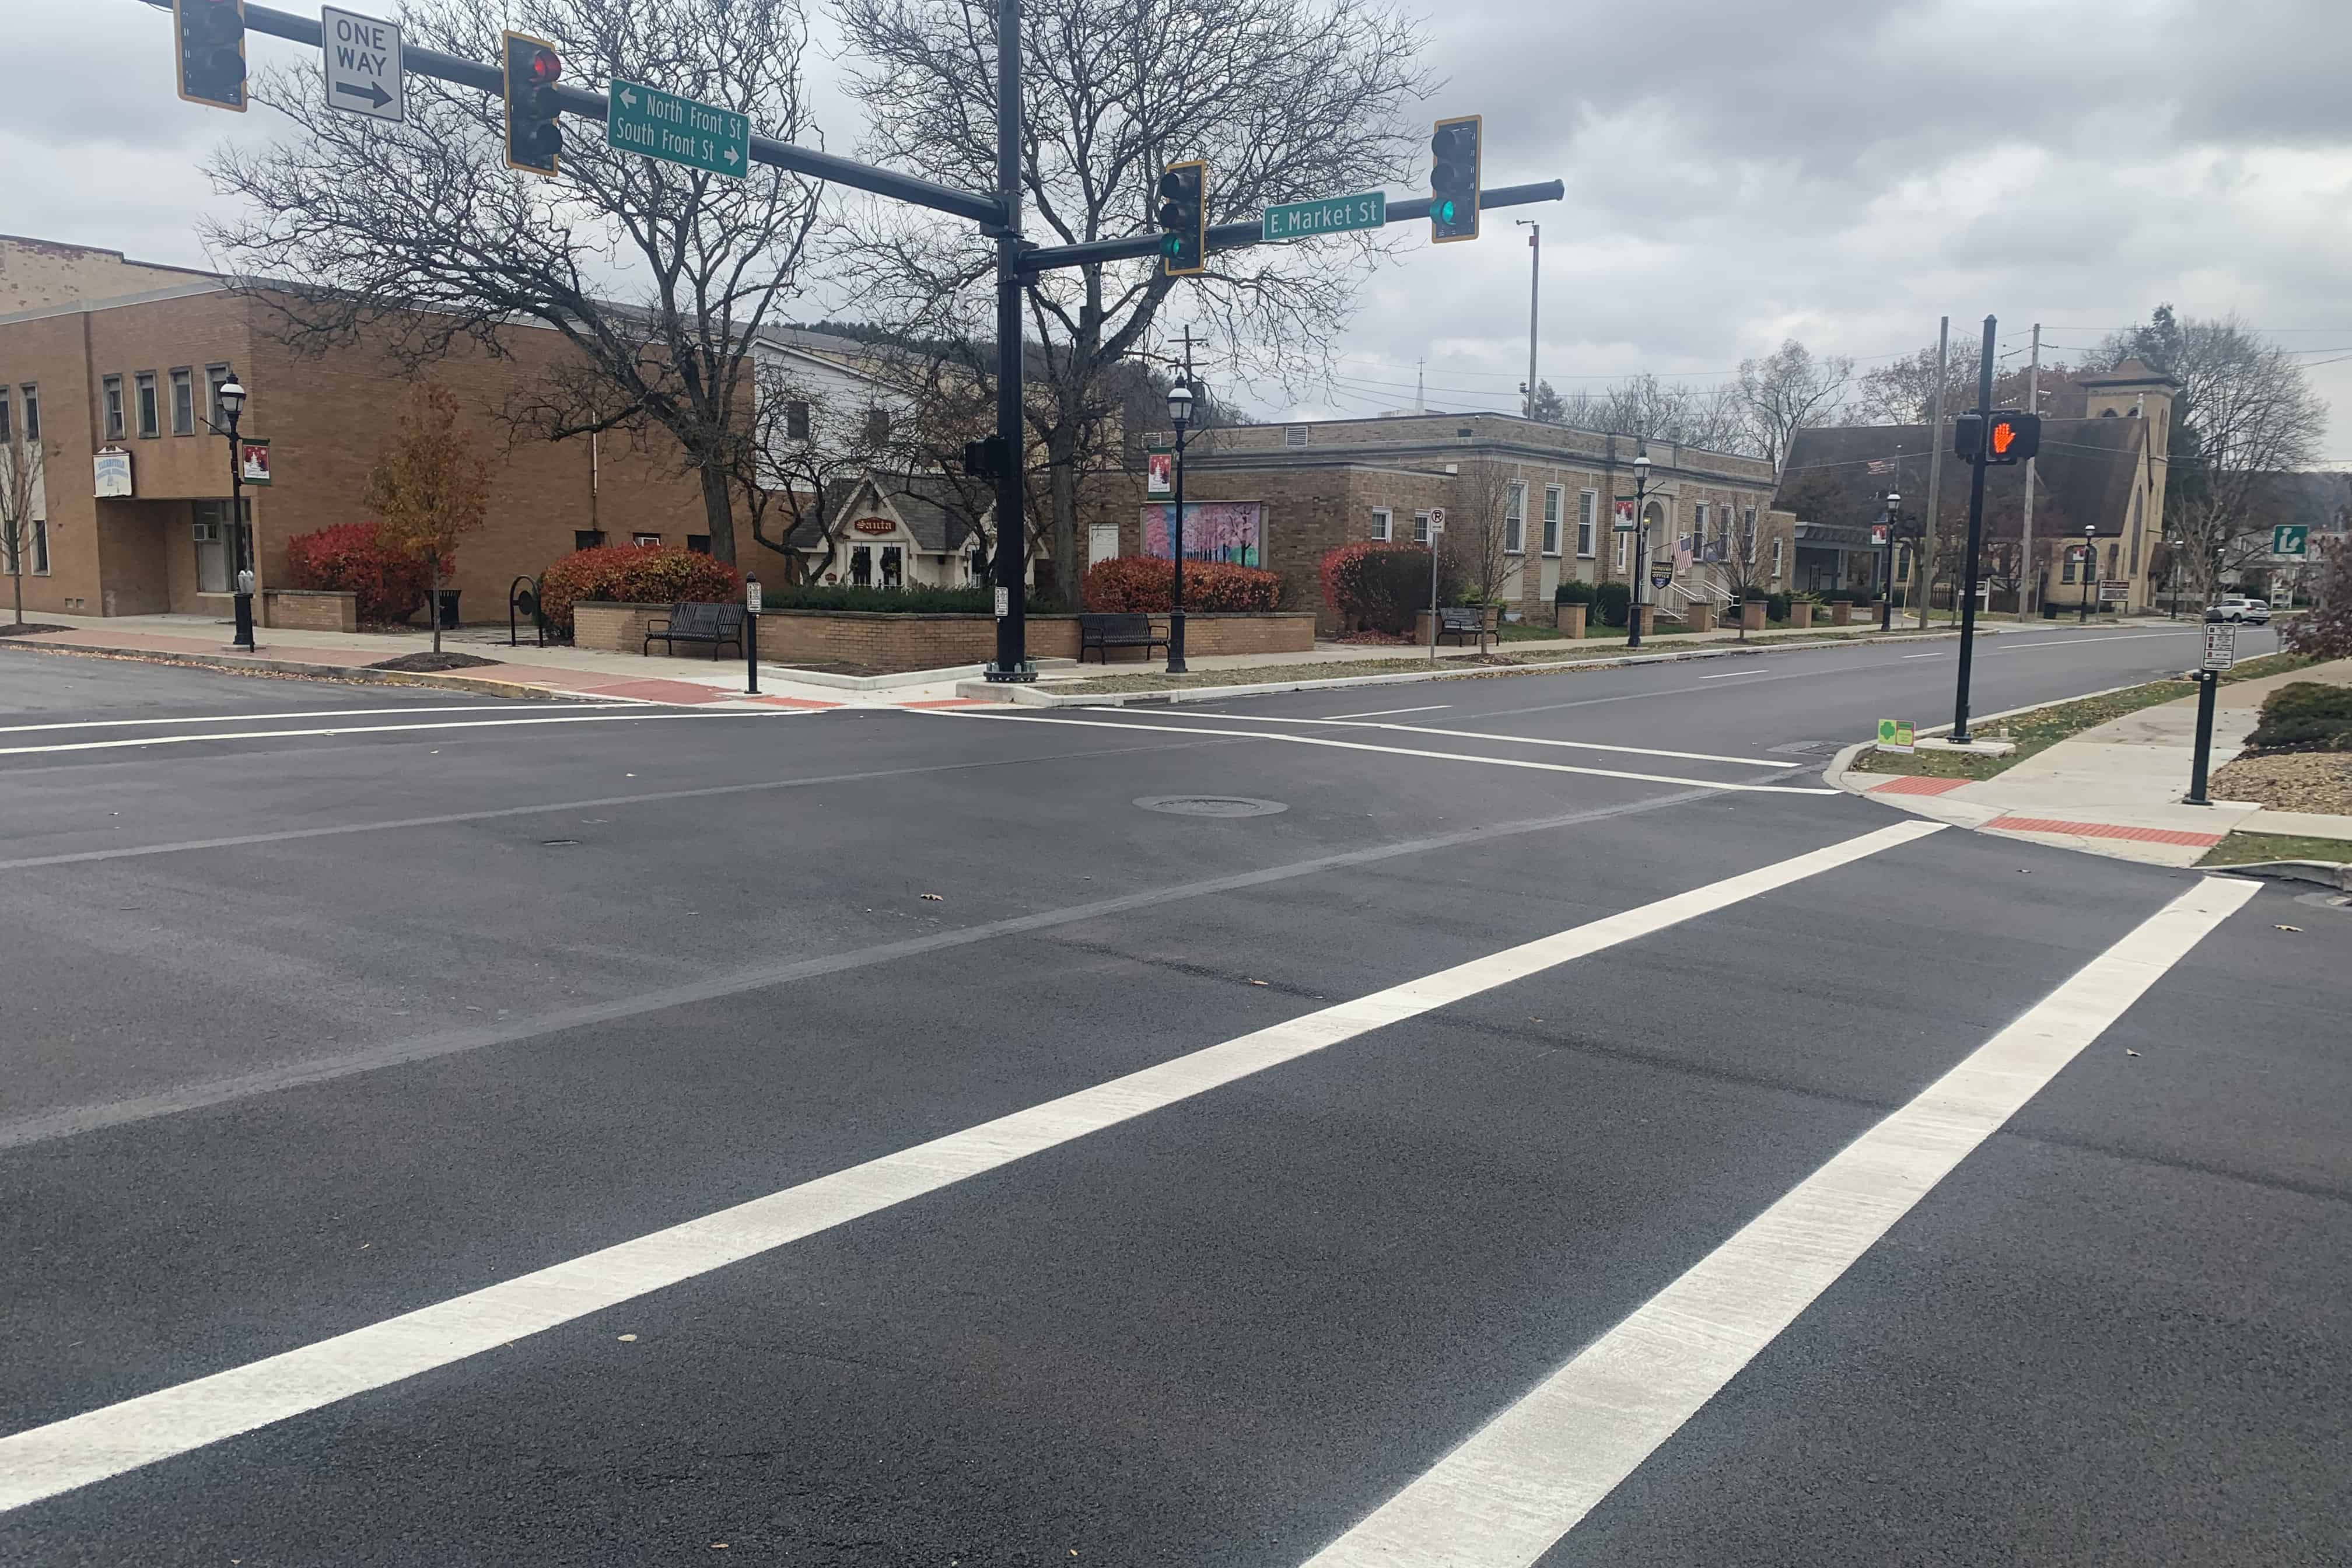 A freshly paved and lined four-way intersection with traffic lights.